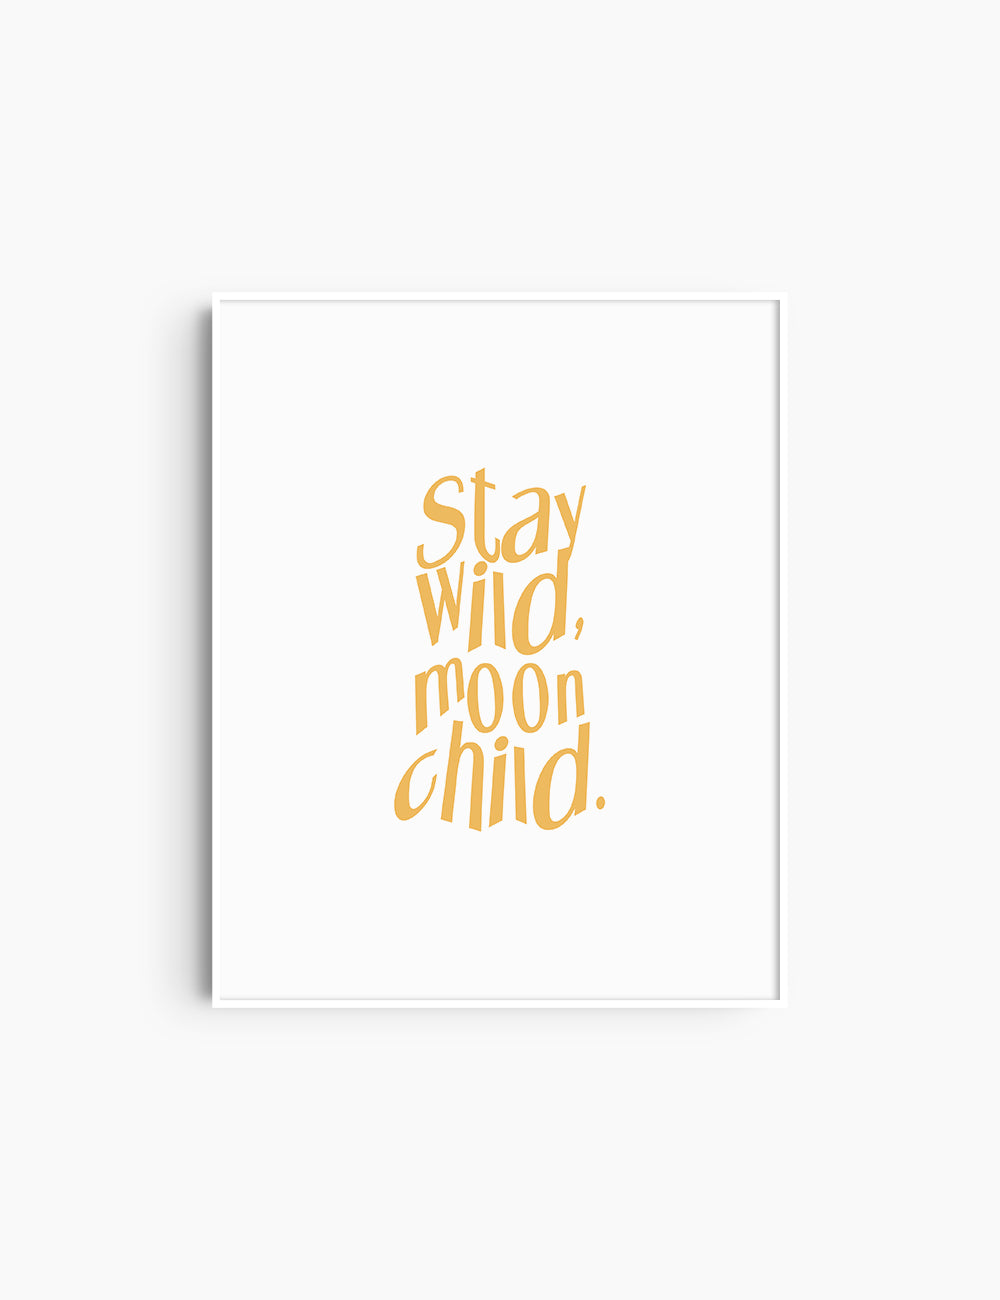 STAY WILD, MOON CHILD. Yellow and White. Printable Wall Art Quote.